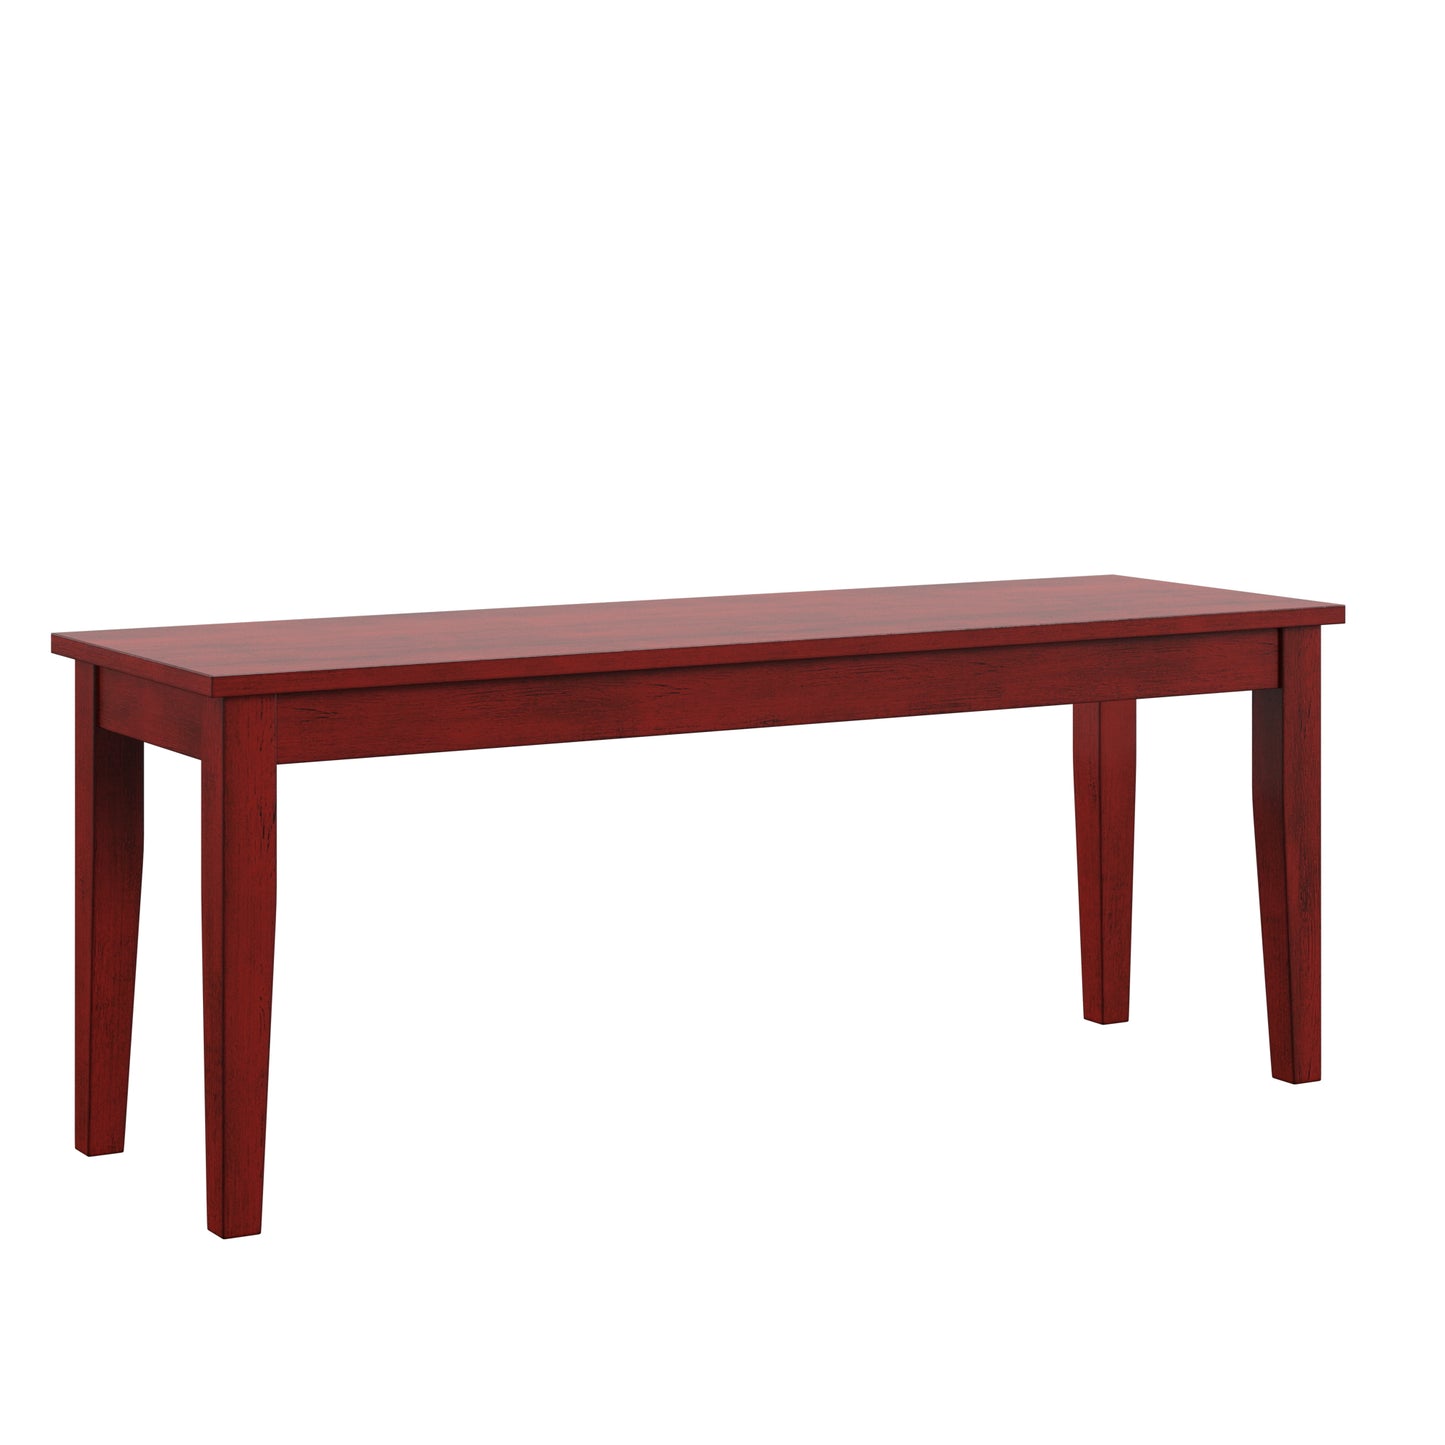 Wood Dining Bench - Antique Berry Finish